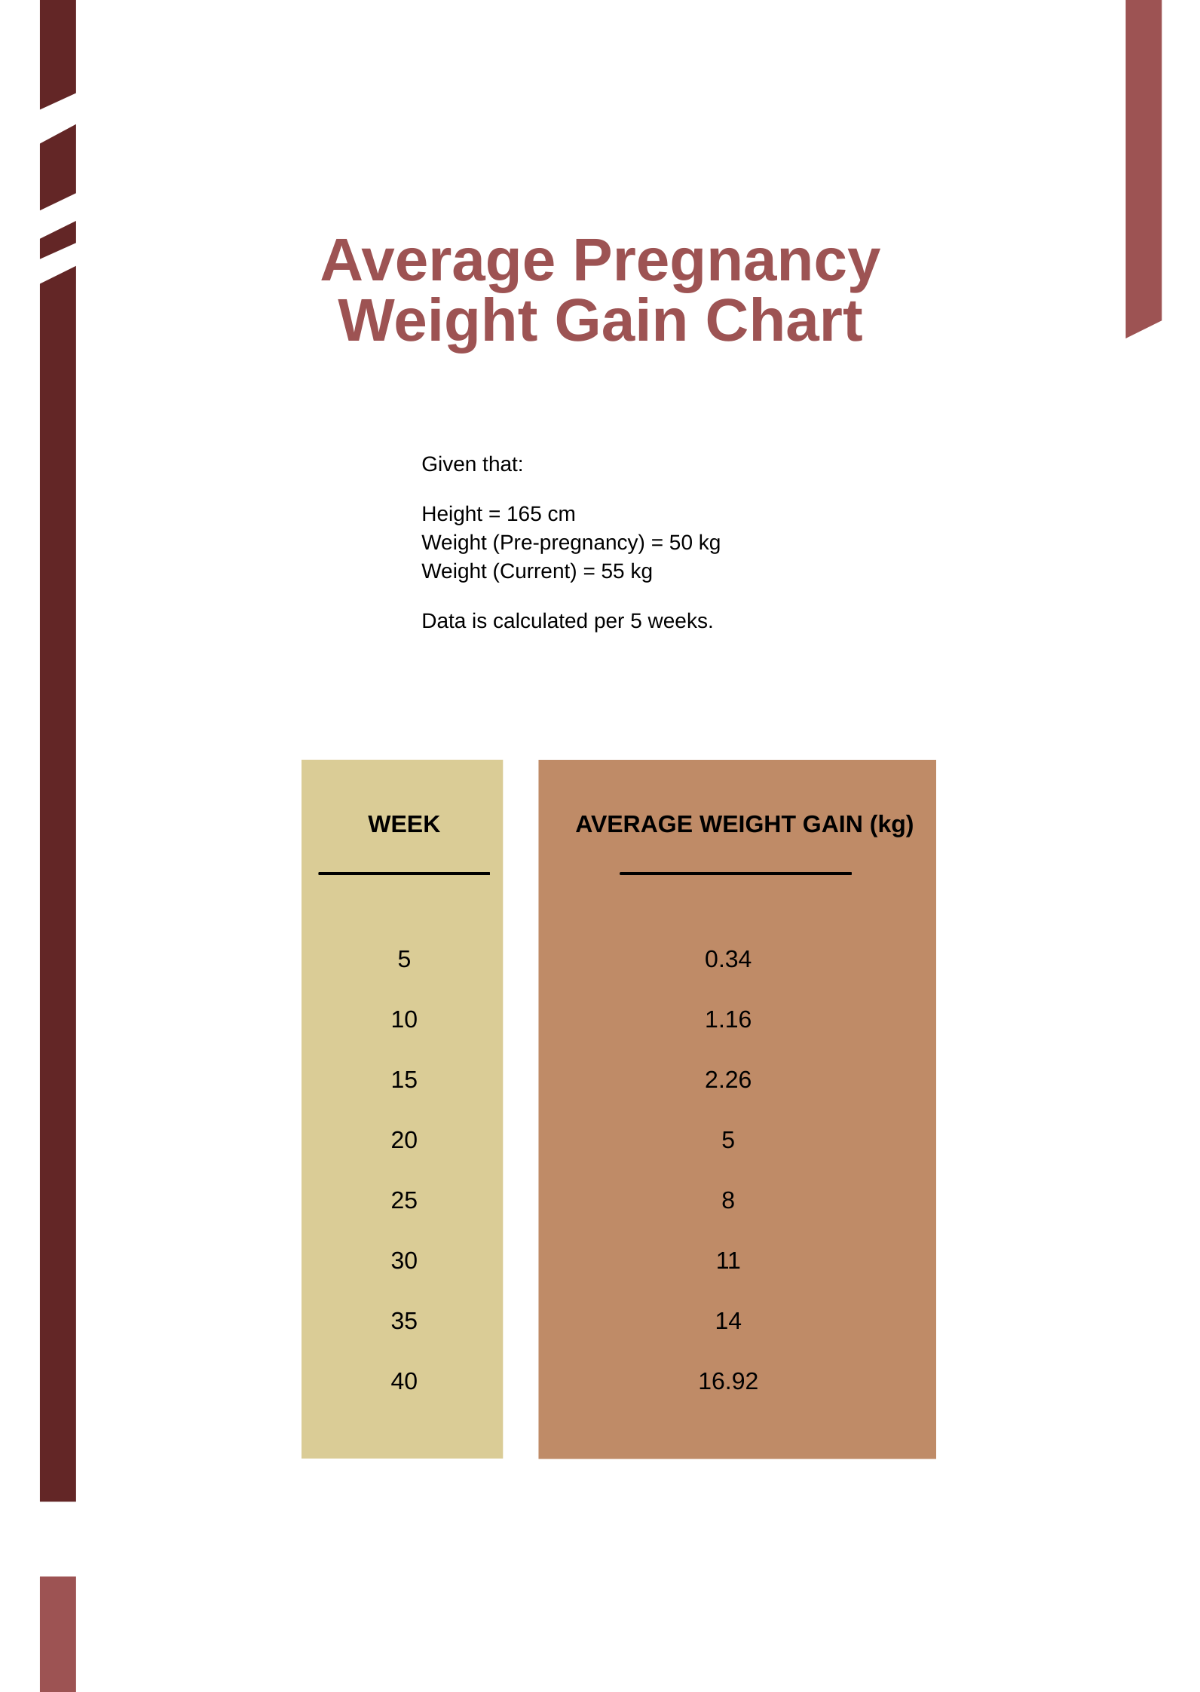 Average Pregnancy Weight Gain Chart Template